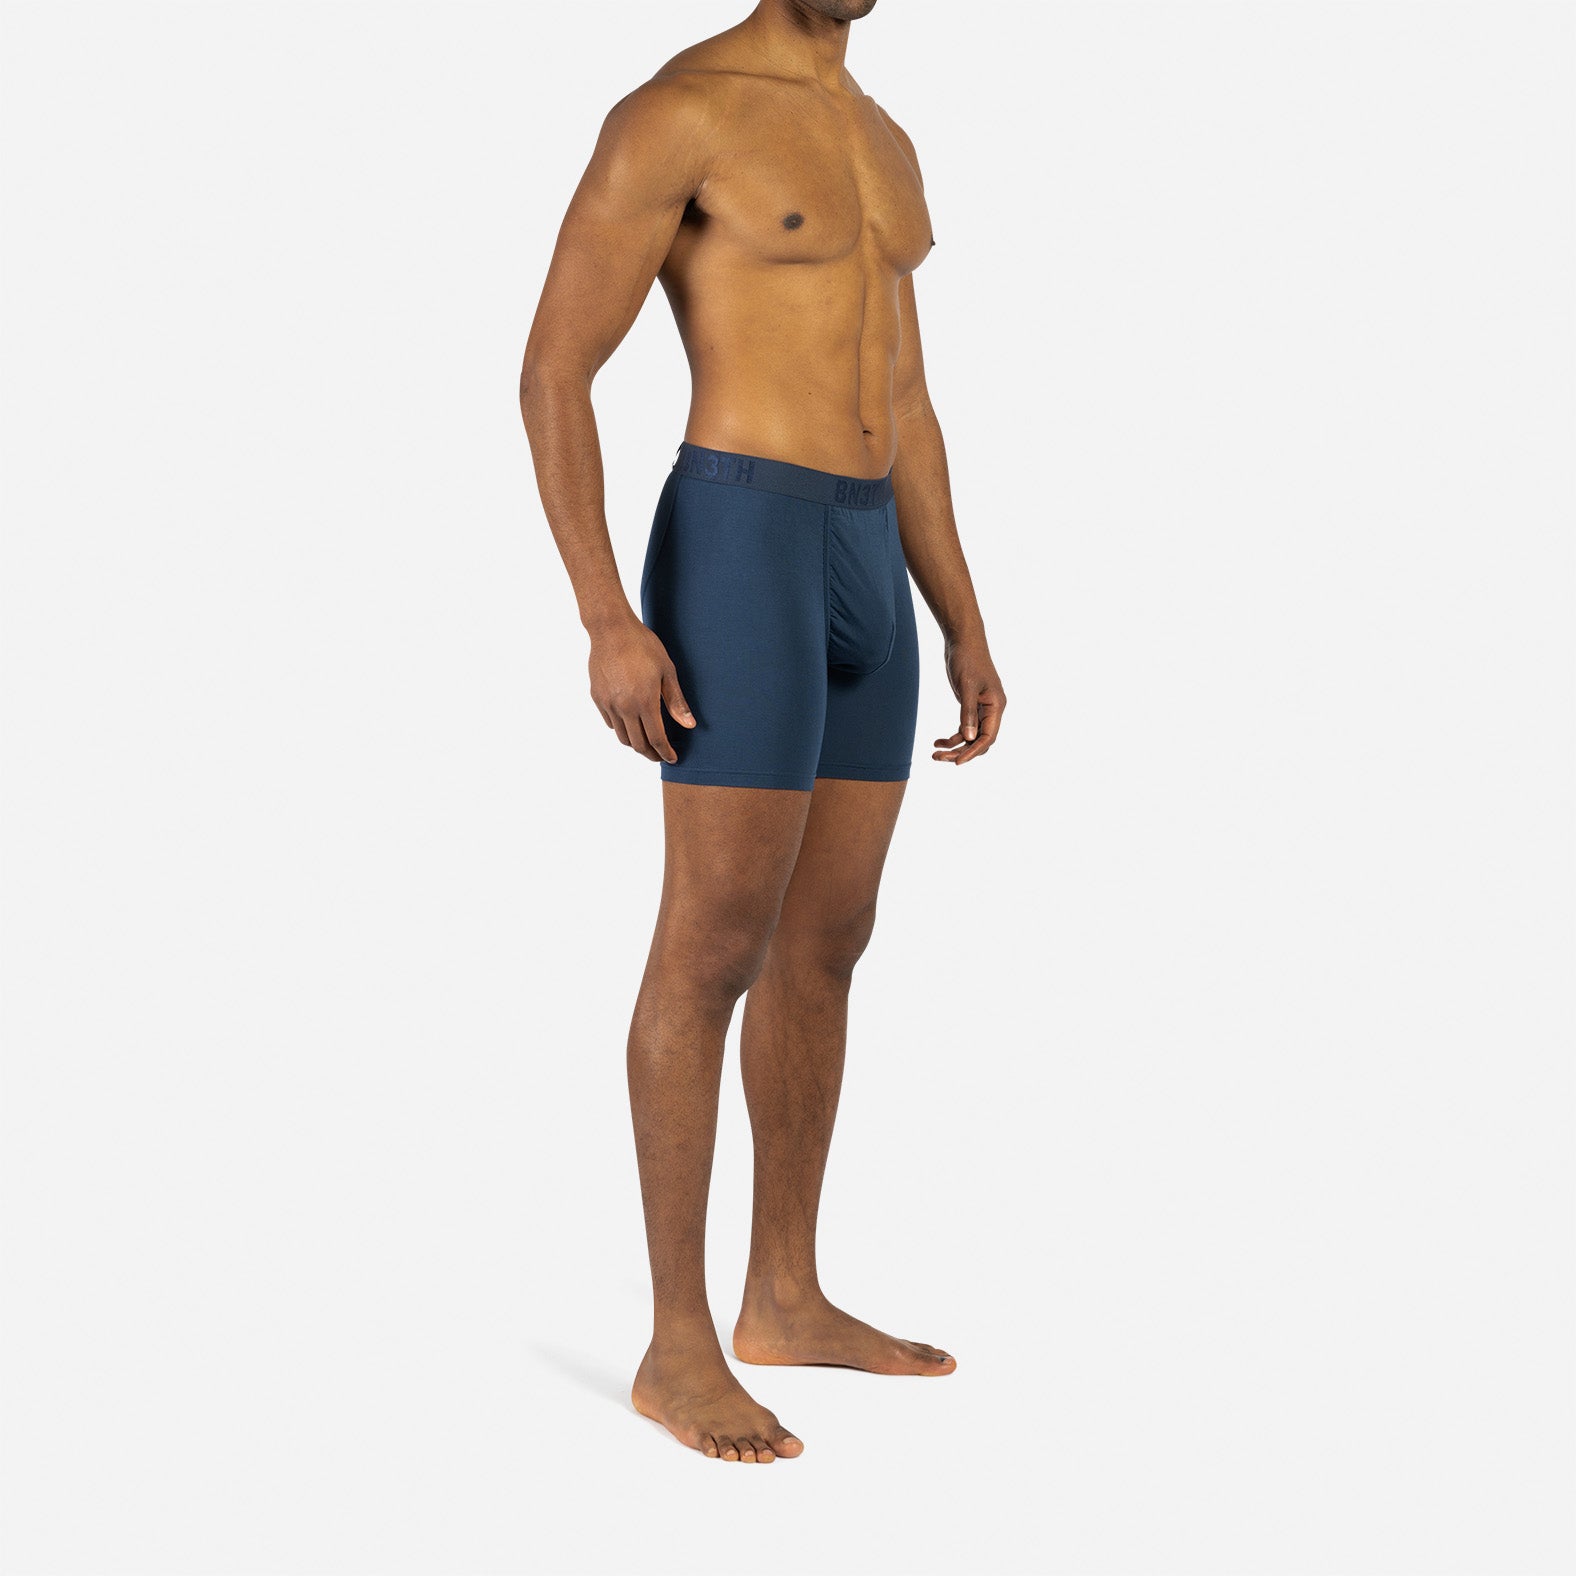 CLASSIC BOXER BRIEF: NAVY/PINEAPPLE FADE FOG 2 PACK